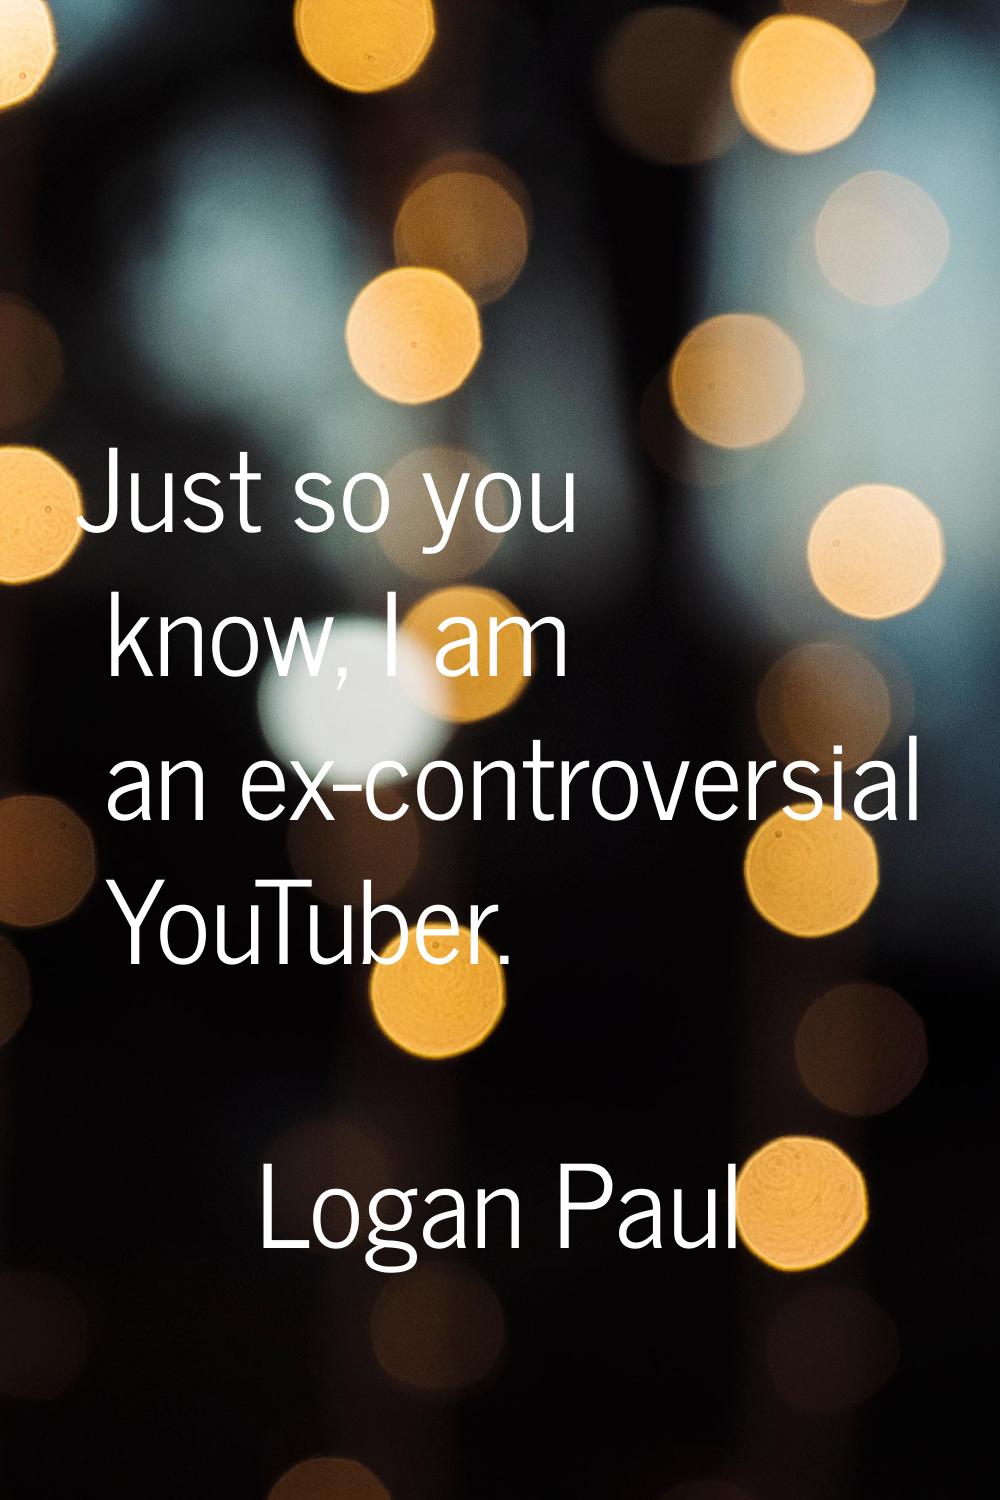 Just so you know, I am an ex-controversial YouTuber.